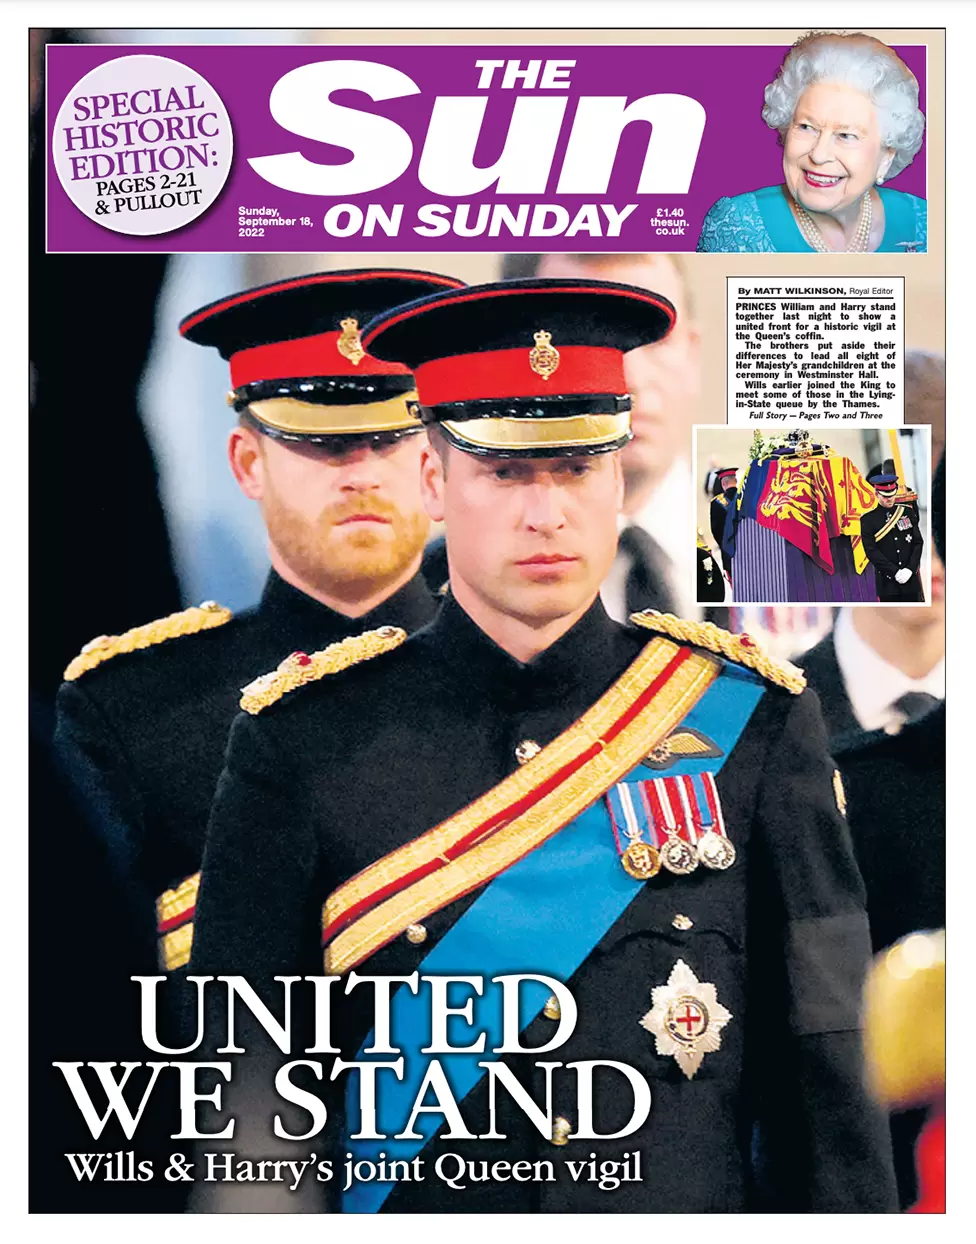 The Sun on Sunday - Untied we stand: Wills and Harry joint Queen vigil